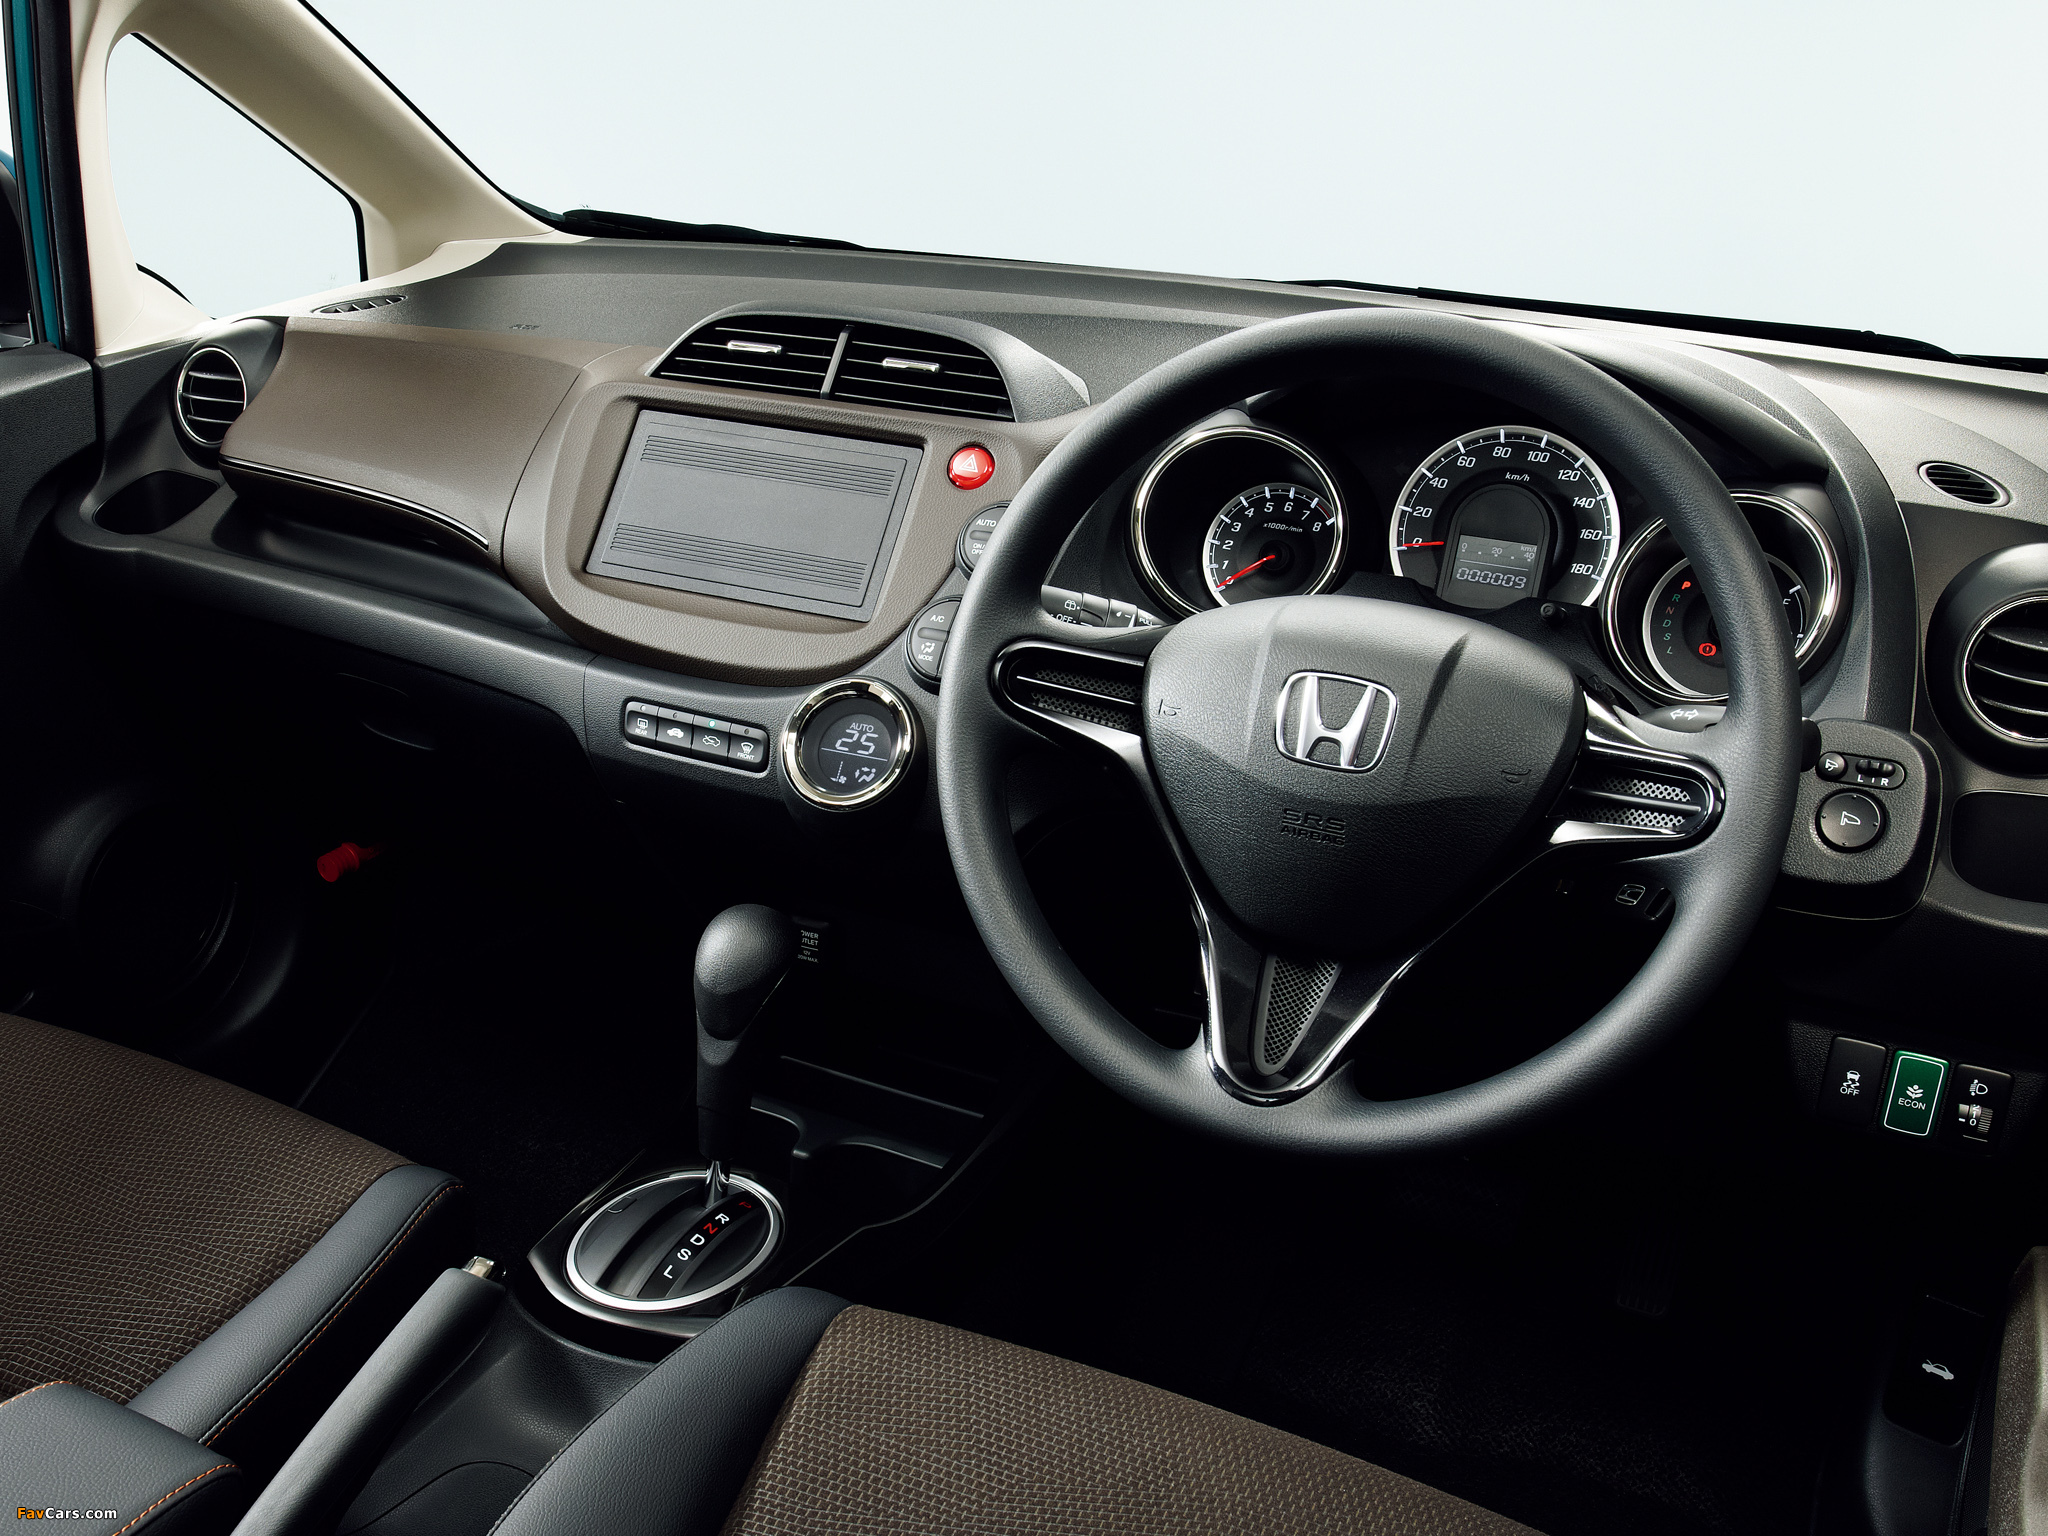 Honda Fit Shuttle (GG) 2011 pictures (2048 x 1536)